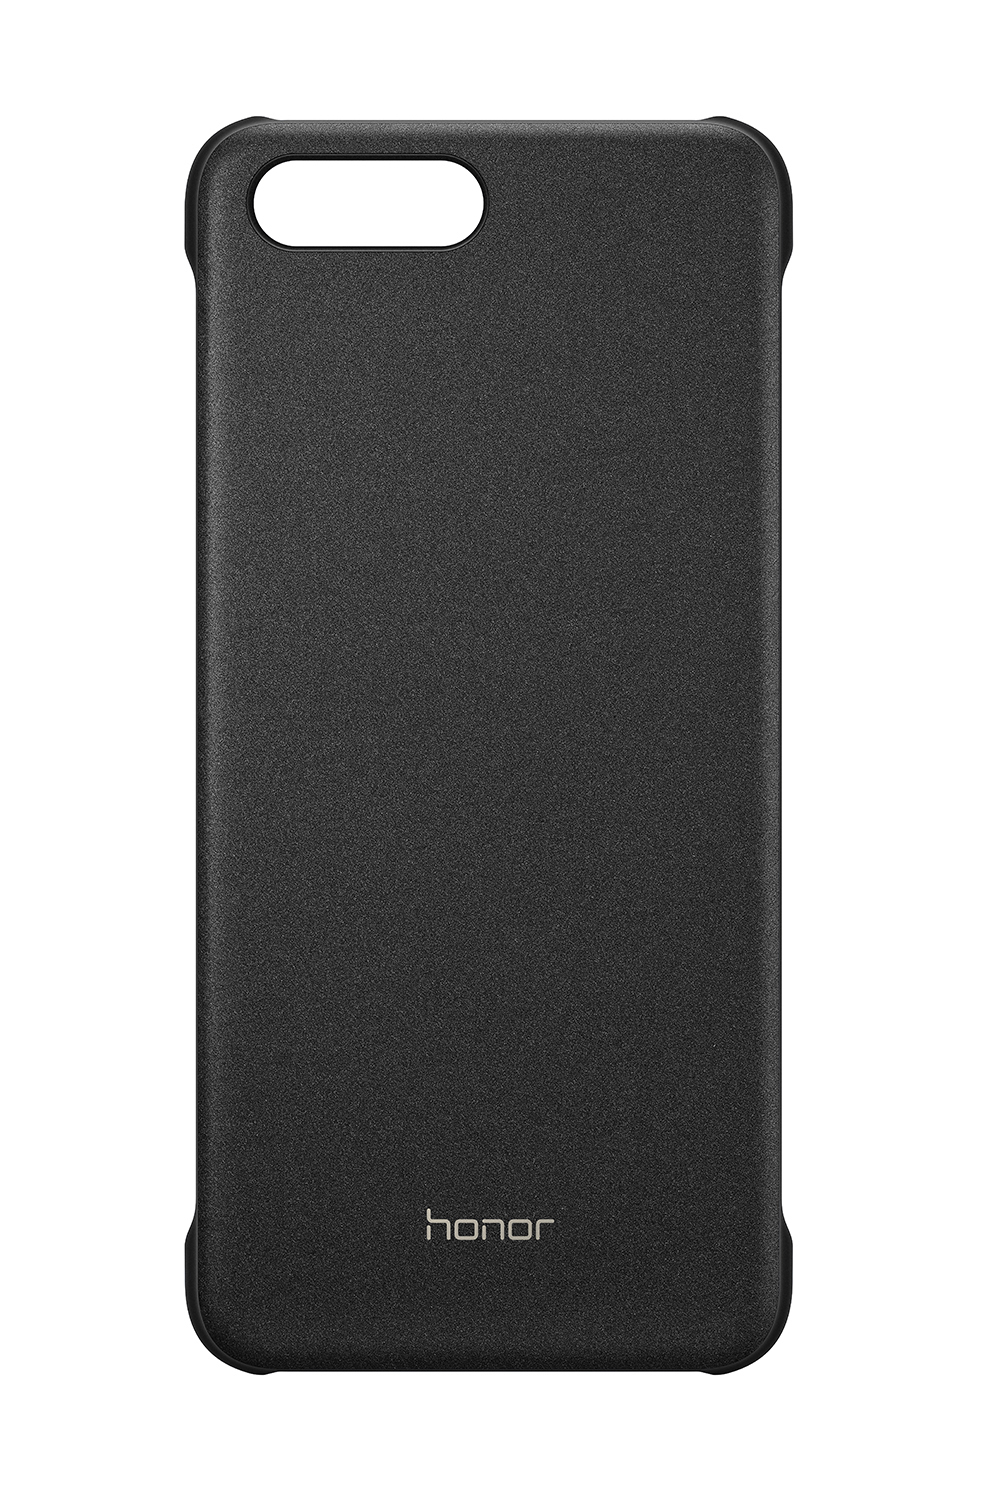 View Schwarz Magnet, PU HONOR Backcover, Honor, 10,